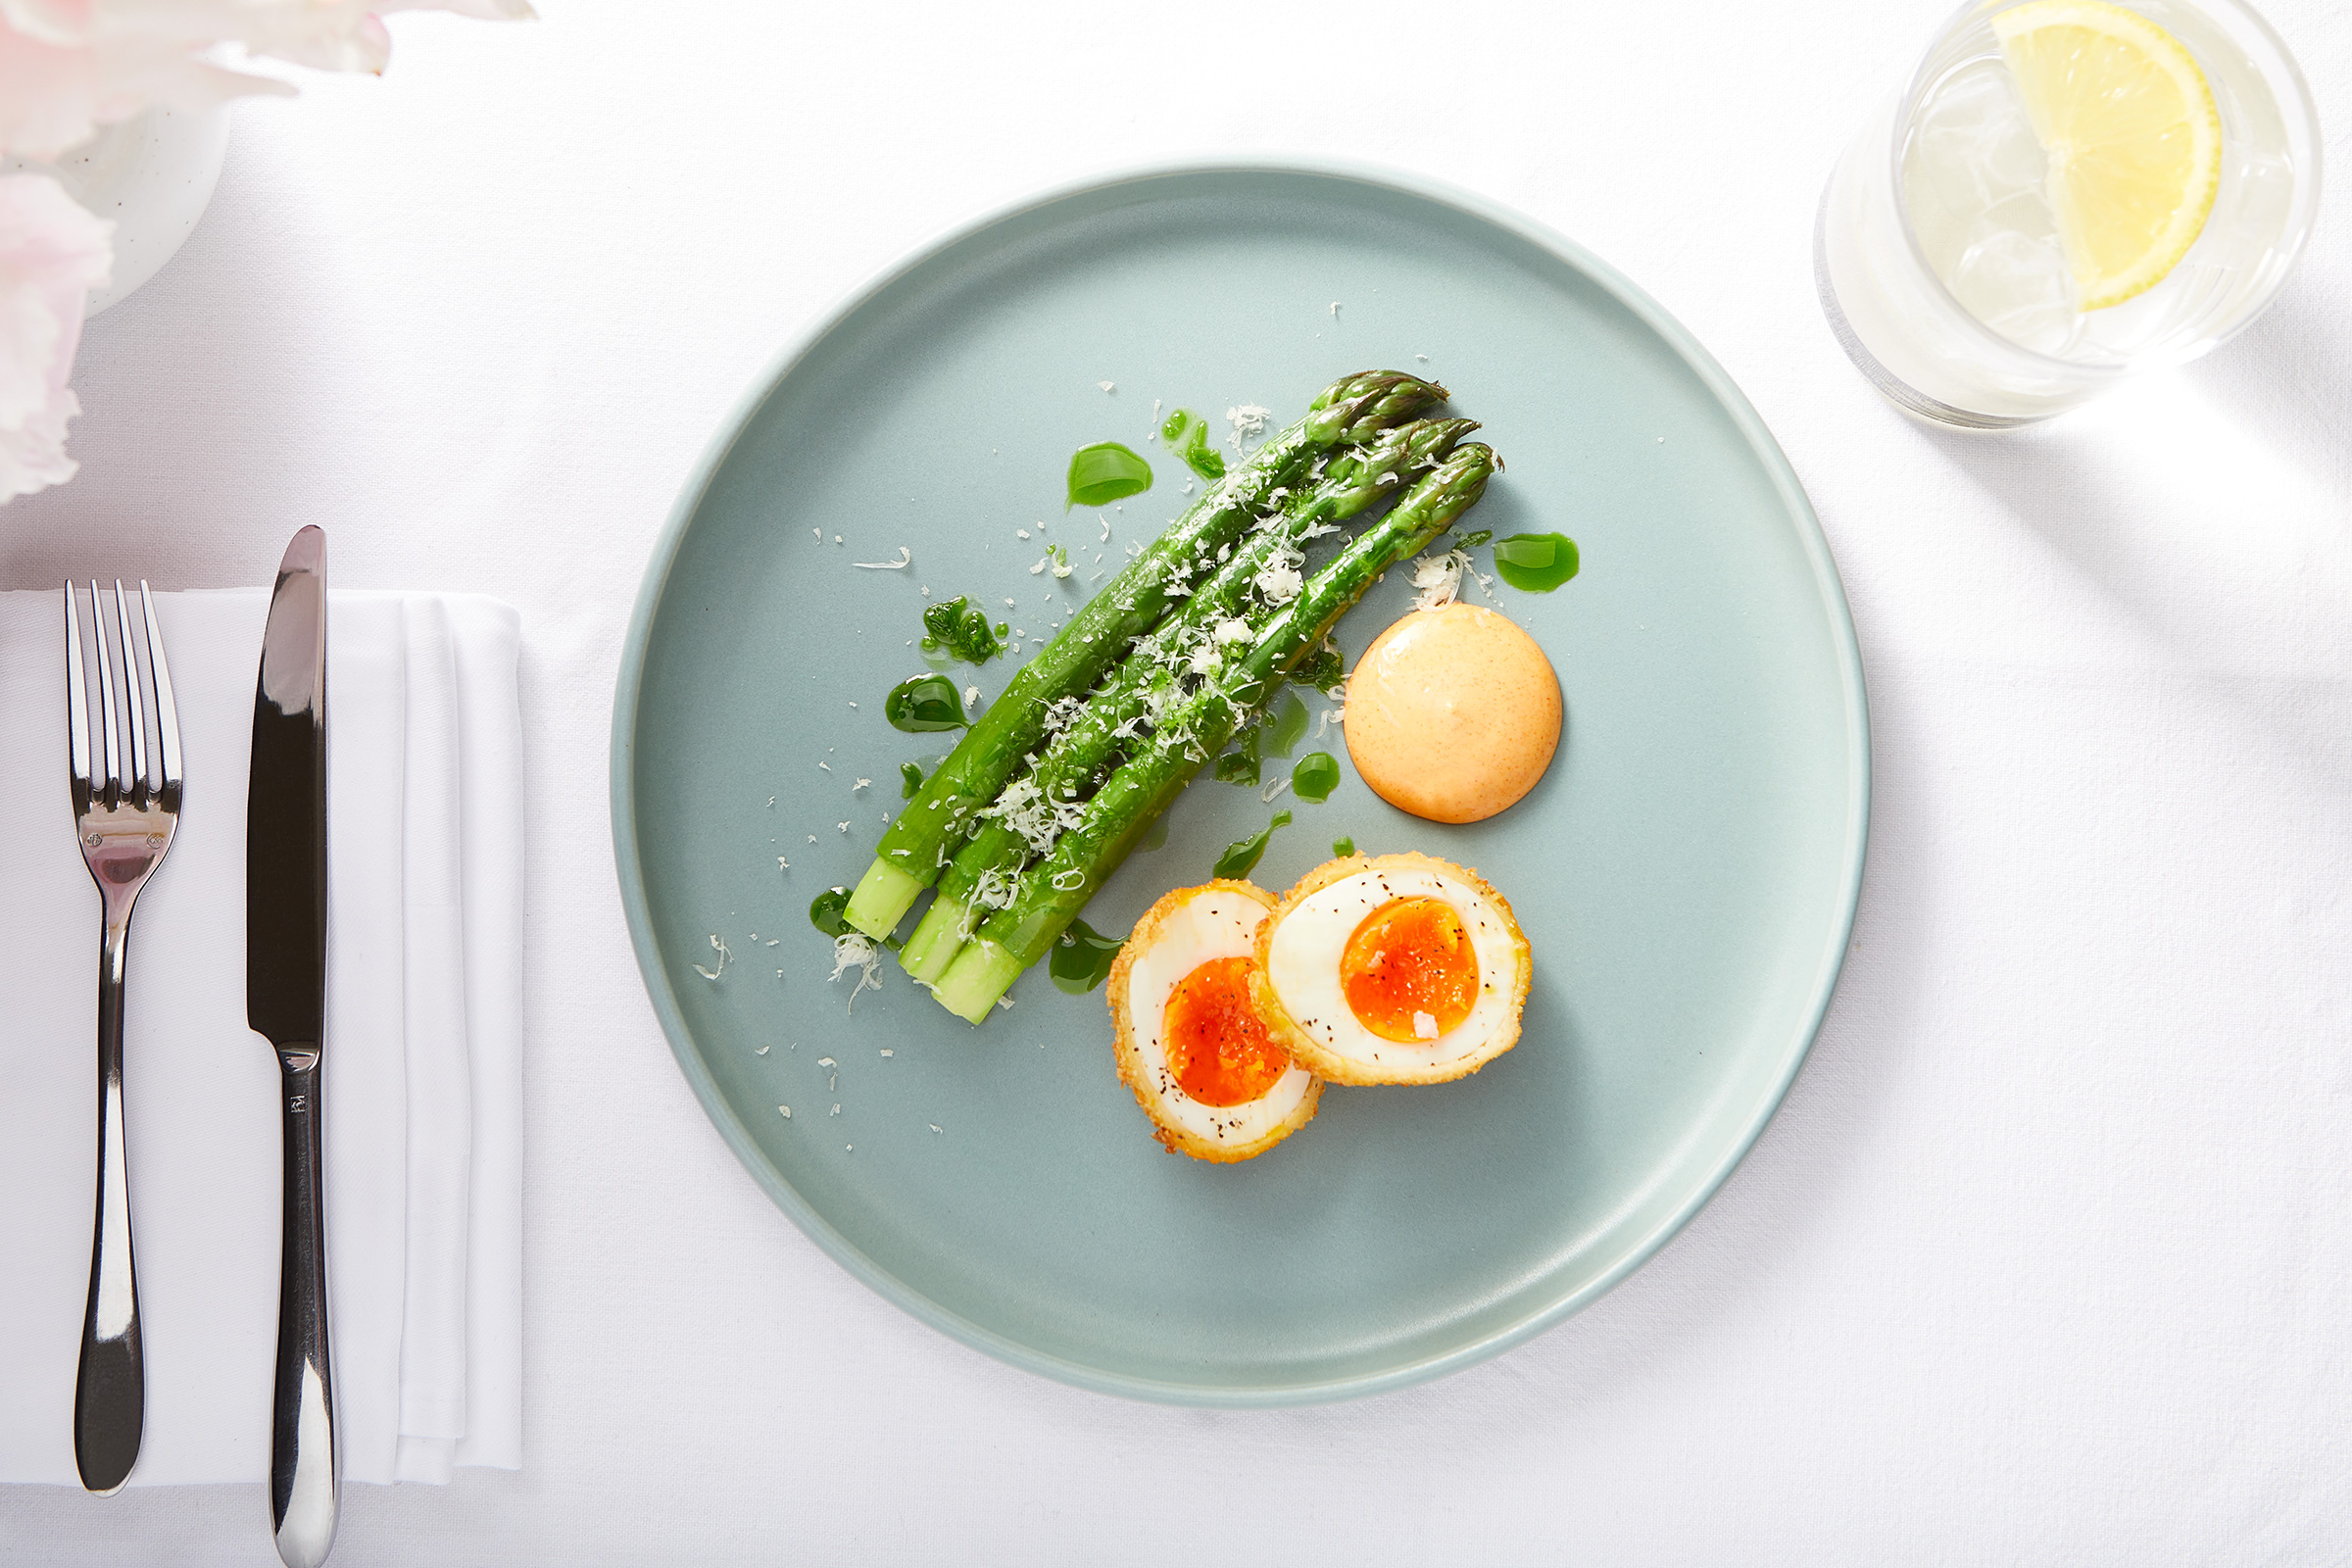 Grilled Asparagus and Crispy Egg, Uk food and travel photographer